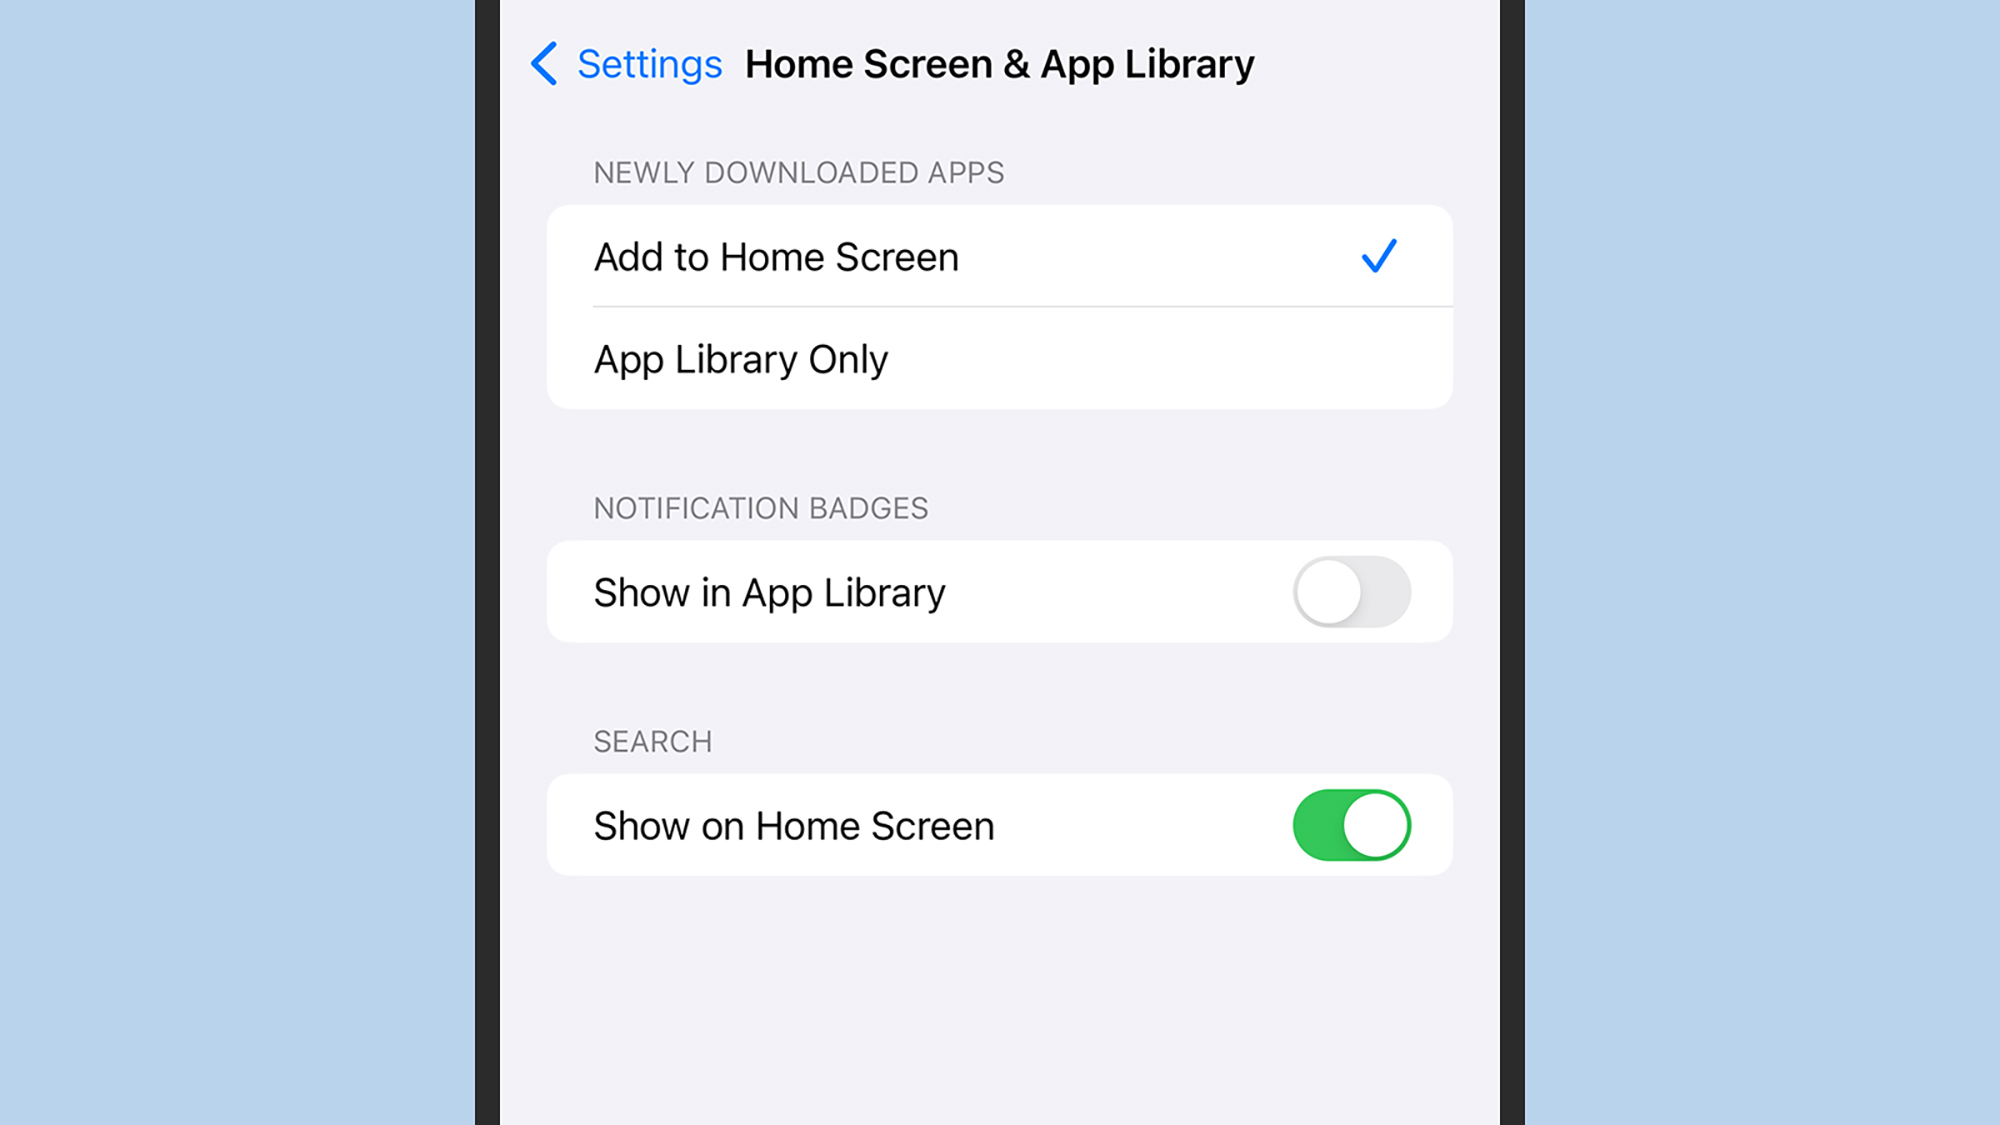 screenshot of home screen and app library settings page on iphone